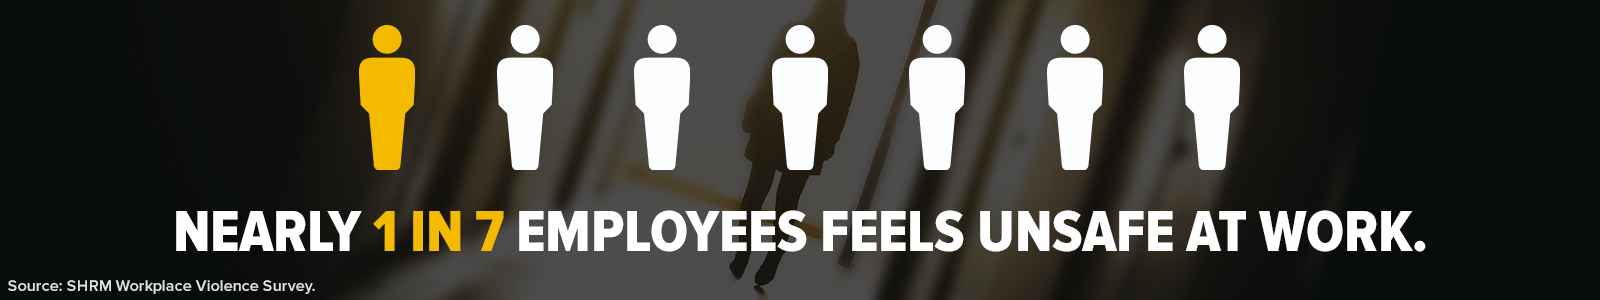 Nearly 1 in 7 employees feels unsafe at work.